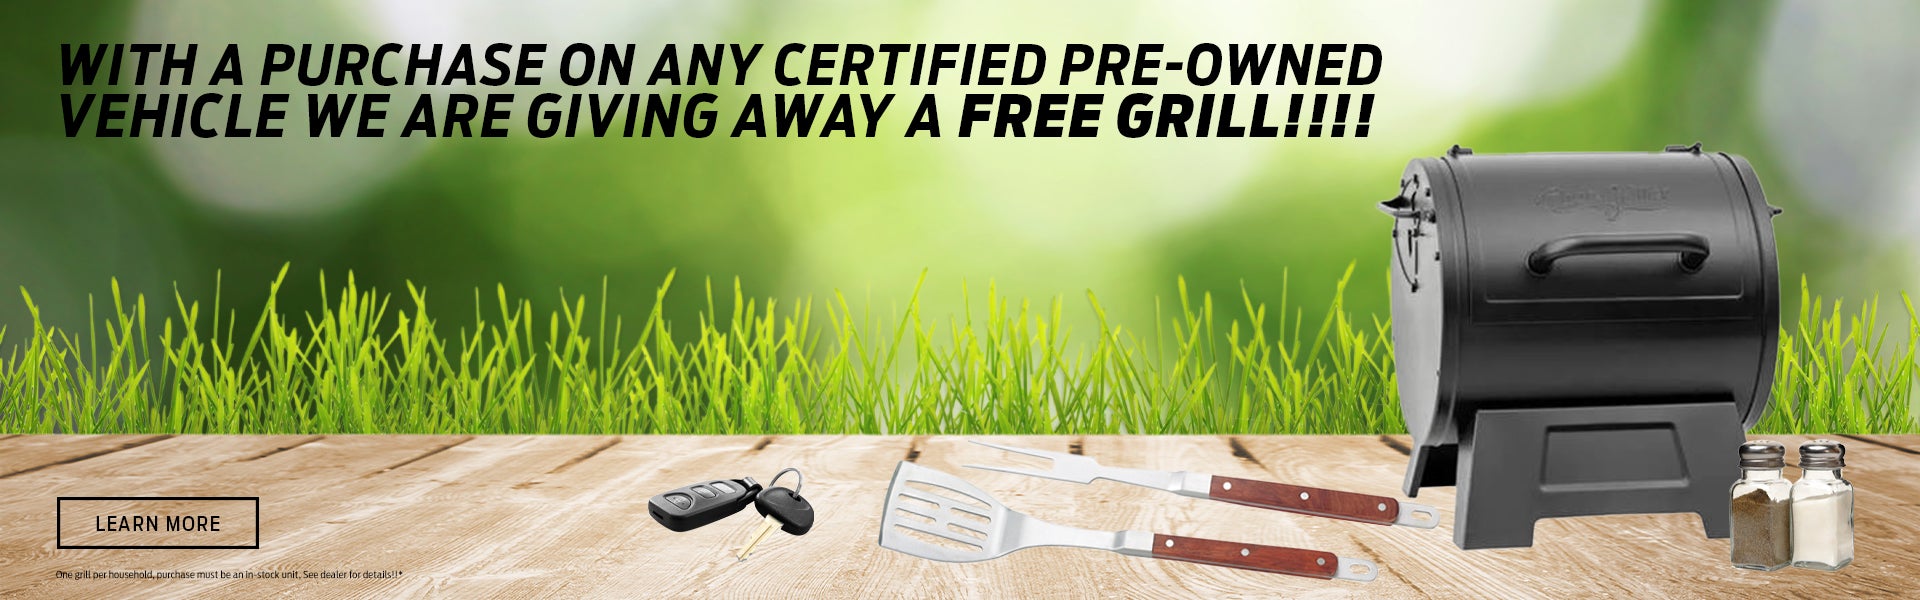 Free Grill giveaway with Certified Pre-Owned vehicle